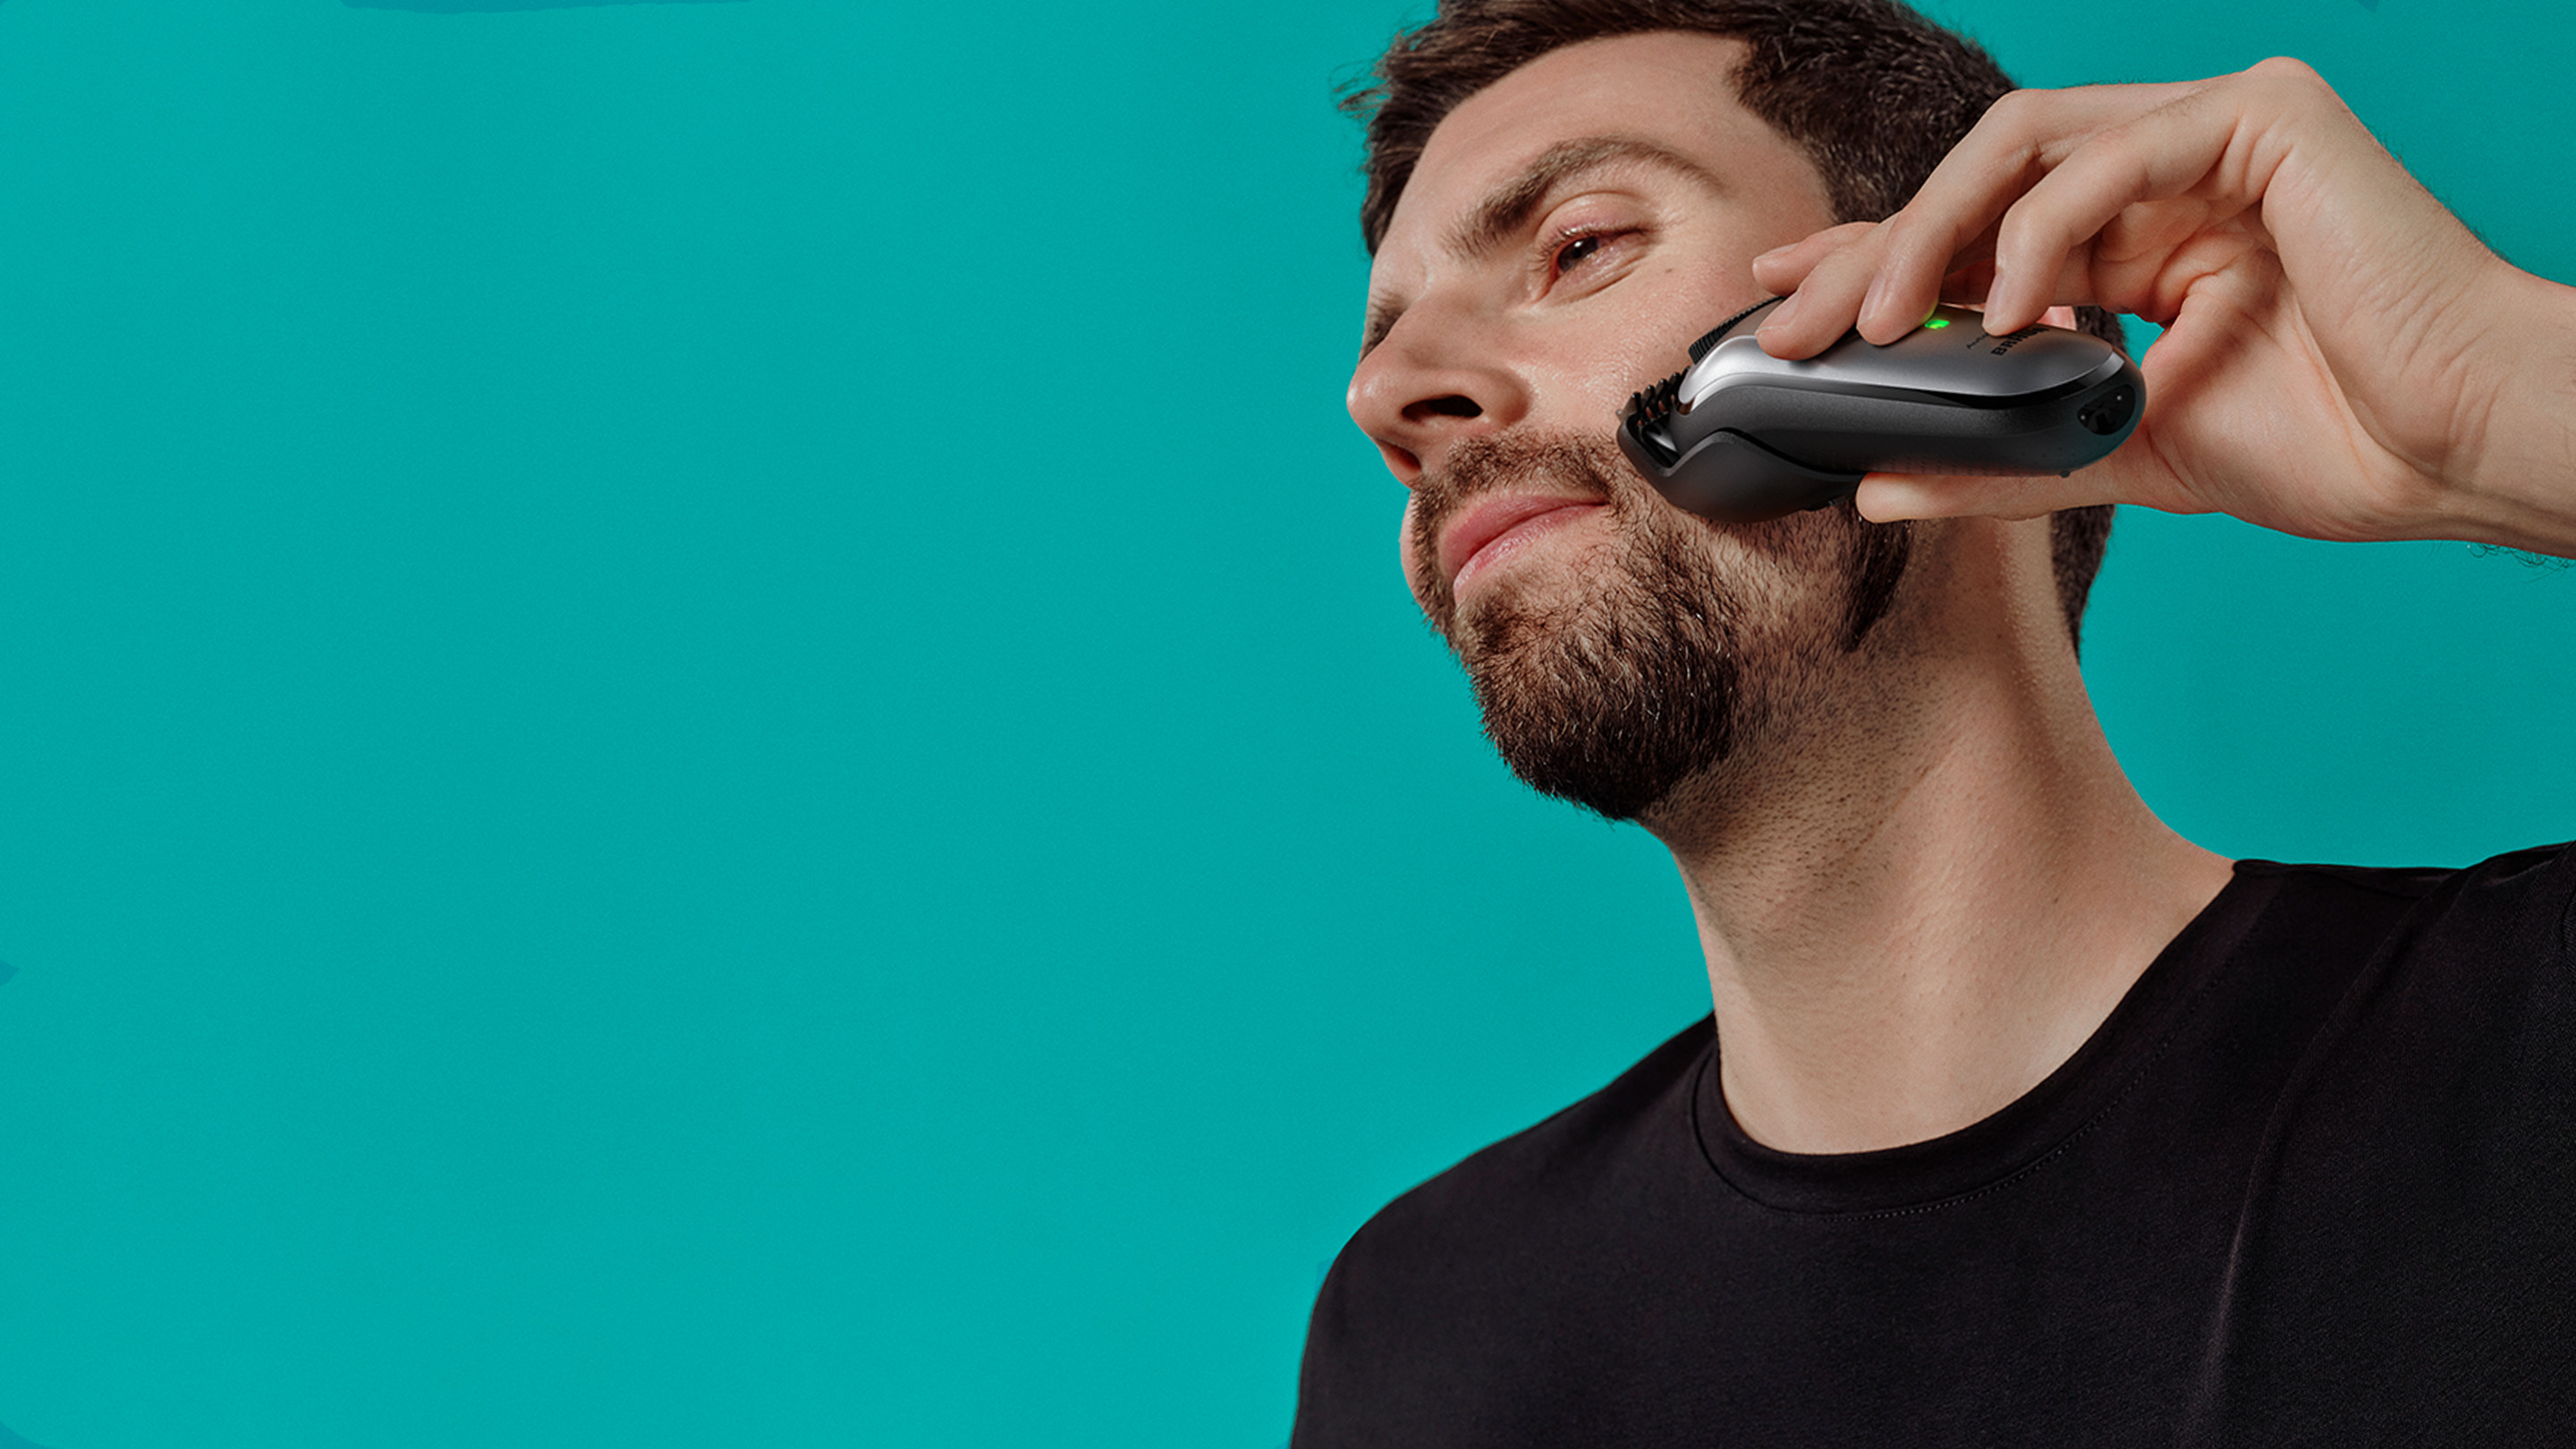 Braun All in one trimmer For Male Grooming | Braun CA